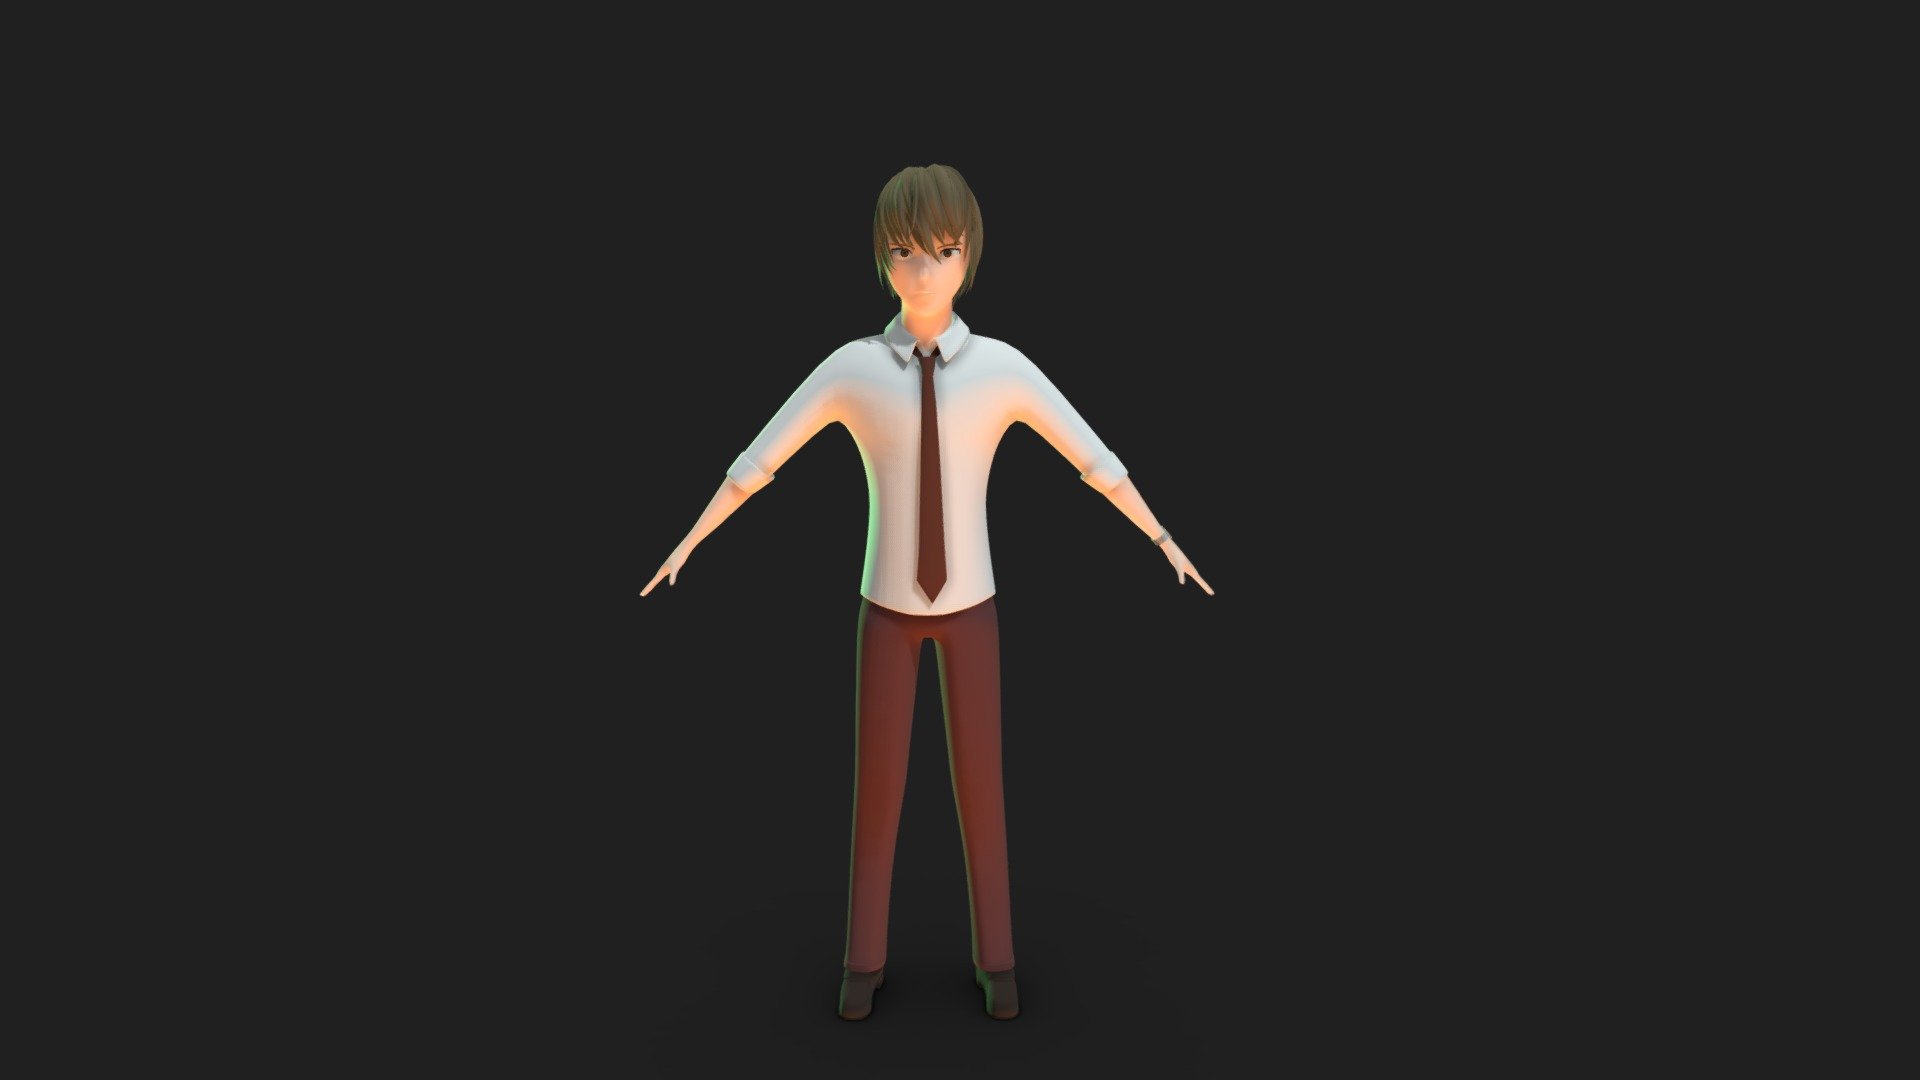 Light Yagami from the Death Note Manga/Anime - Light Yagami - 3D model by Doug Hayward (@DougHayward) 3d model